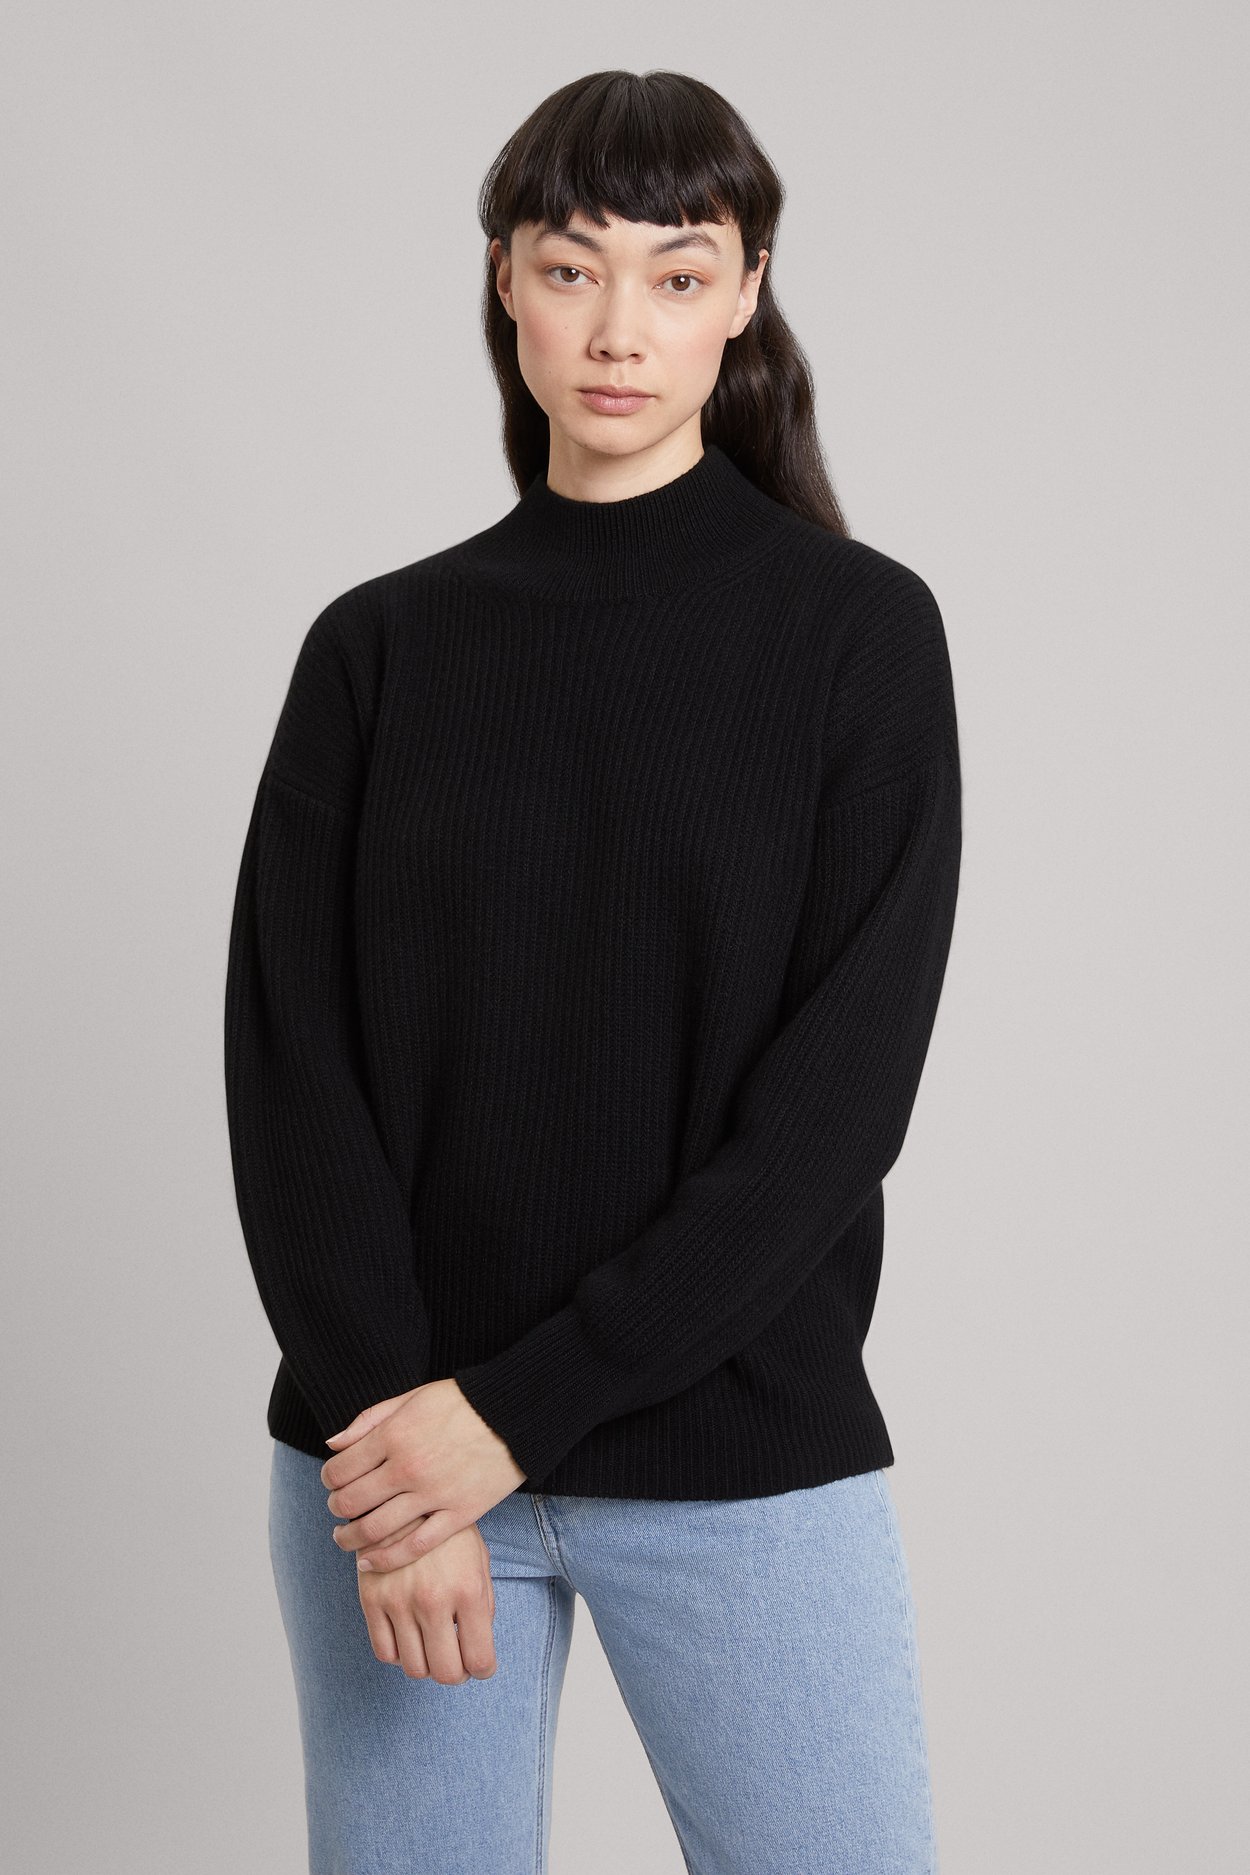 Black Mock Neck Sweater | 100% Recycled Wool - ASKET